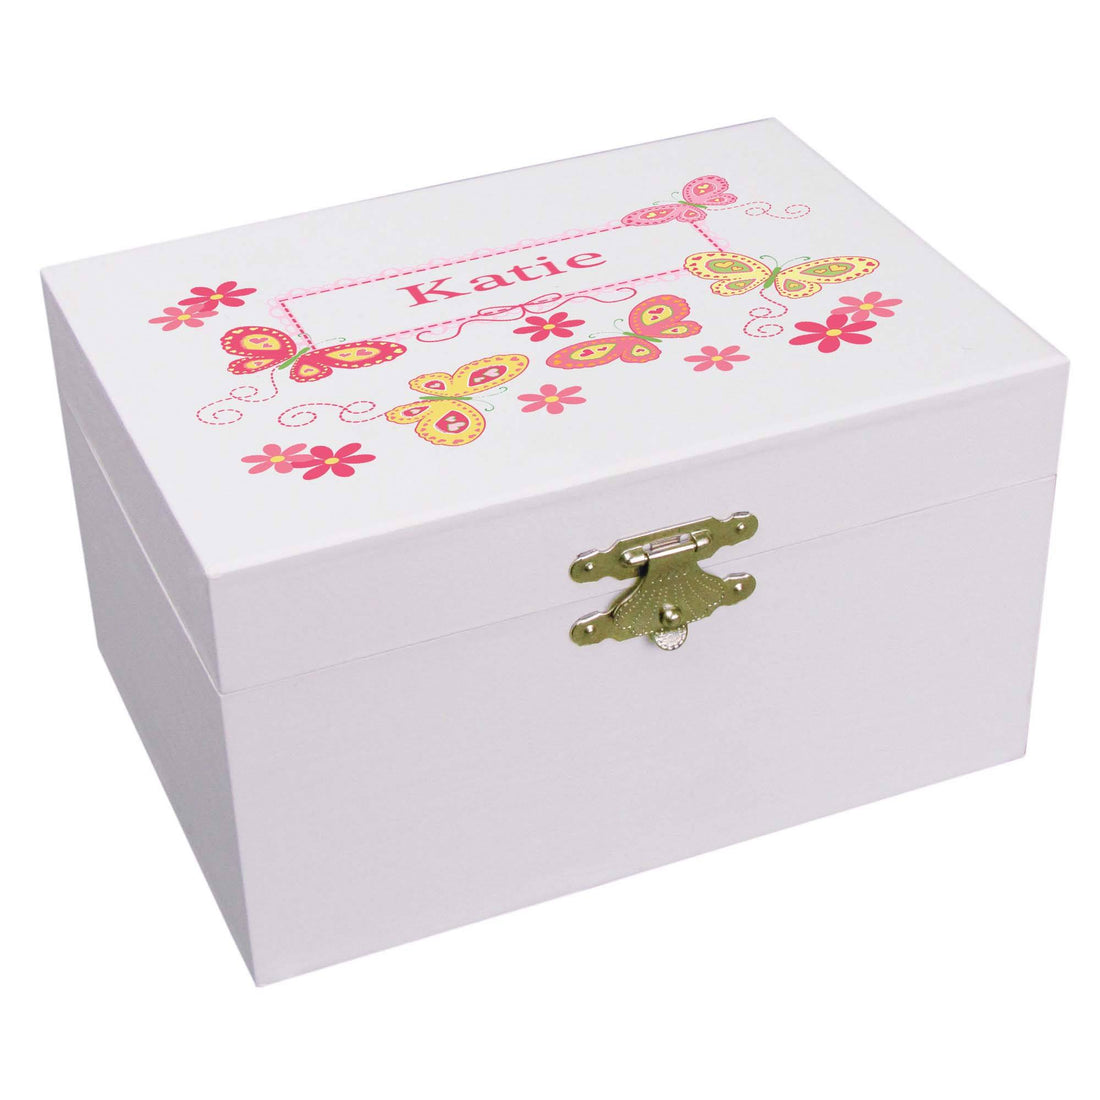 Personalized Ballerina Jewelry Box with Butterflies Yellow Pink design